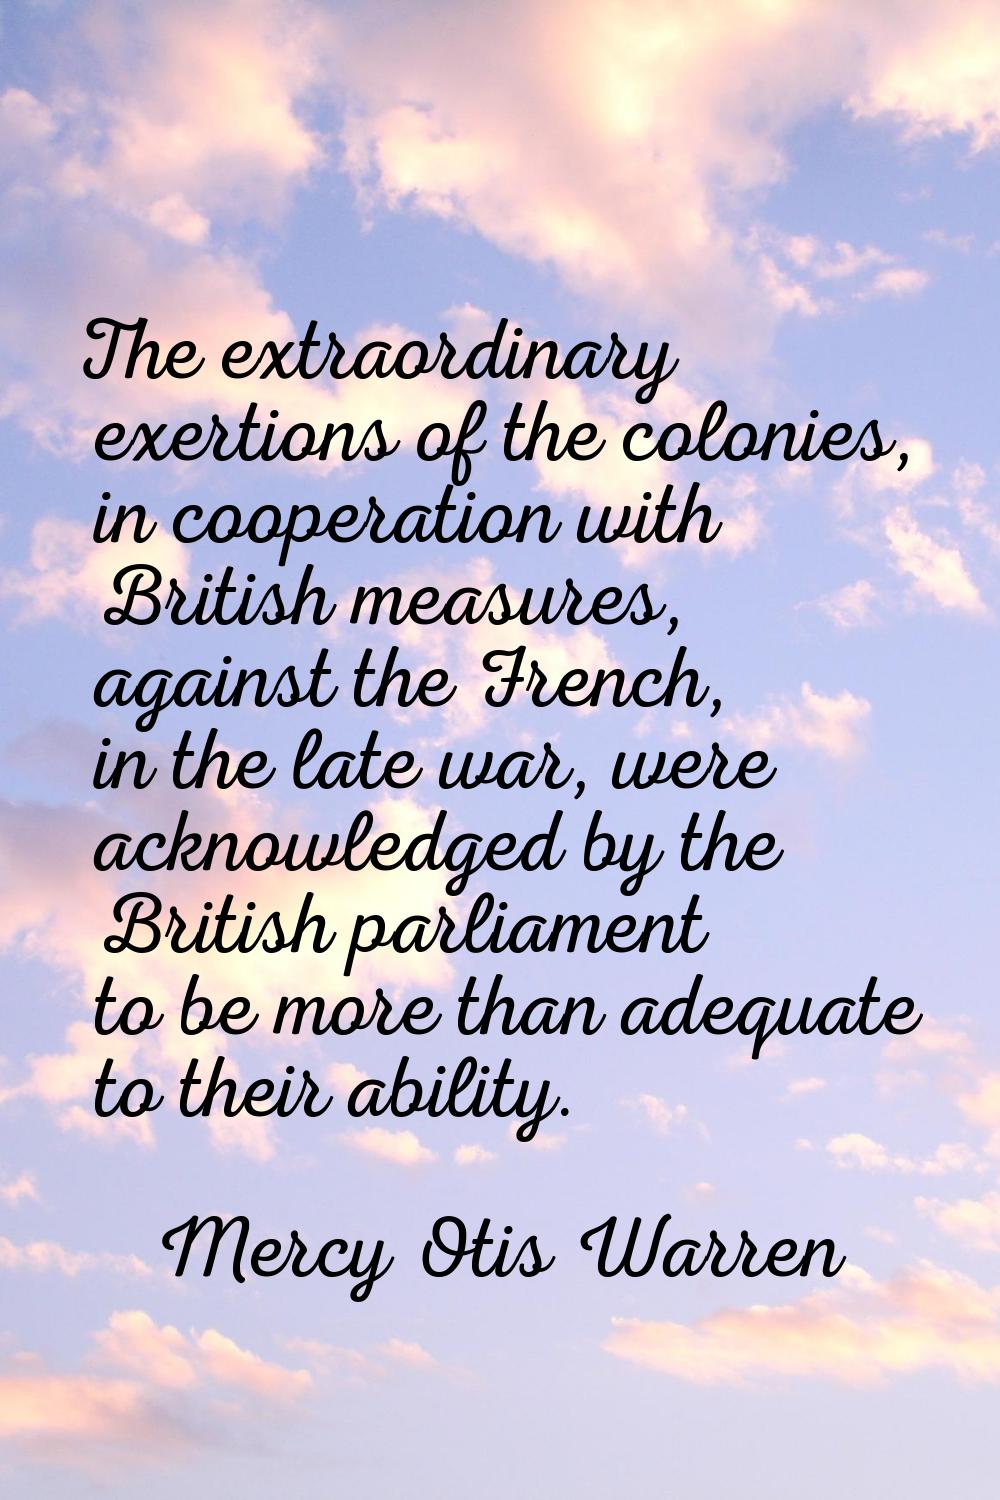 The extraordinary exertions of the colonies, in cooperation with British measures, against the Fren